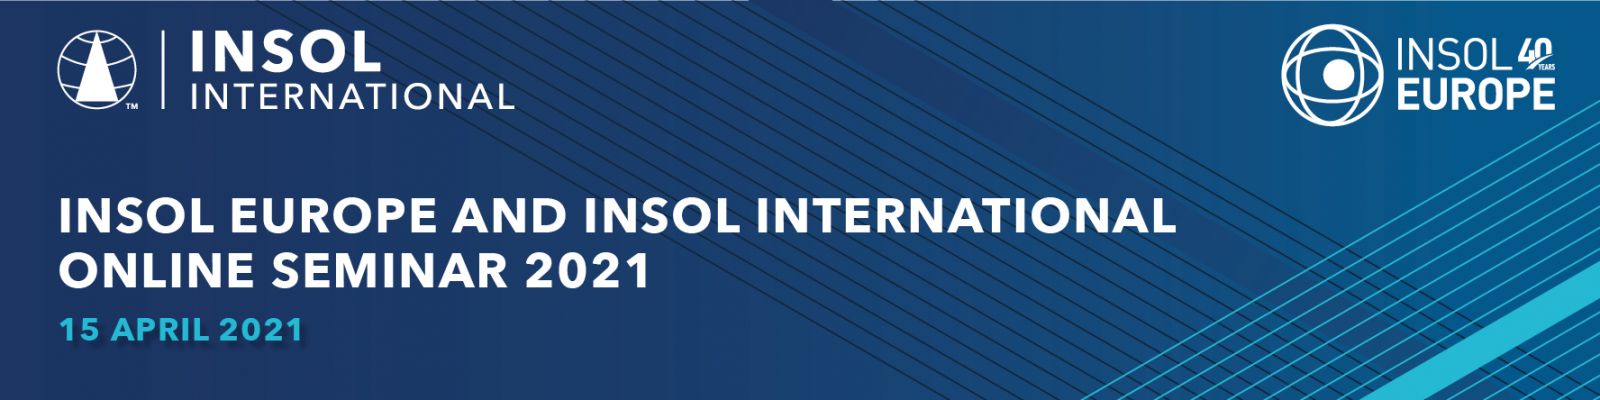 Joint INSOL Europe and INSOL International Online Seminar